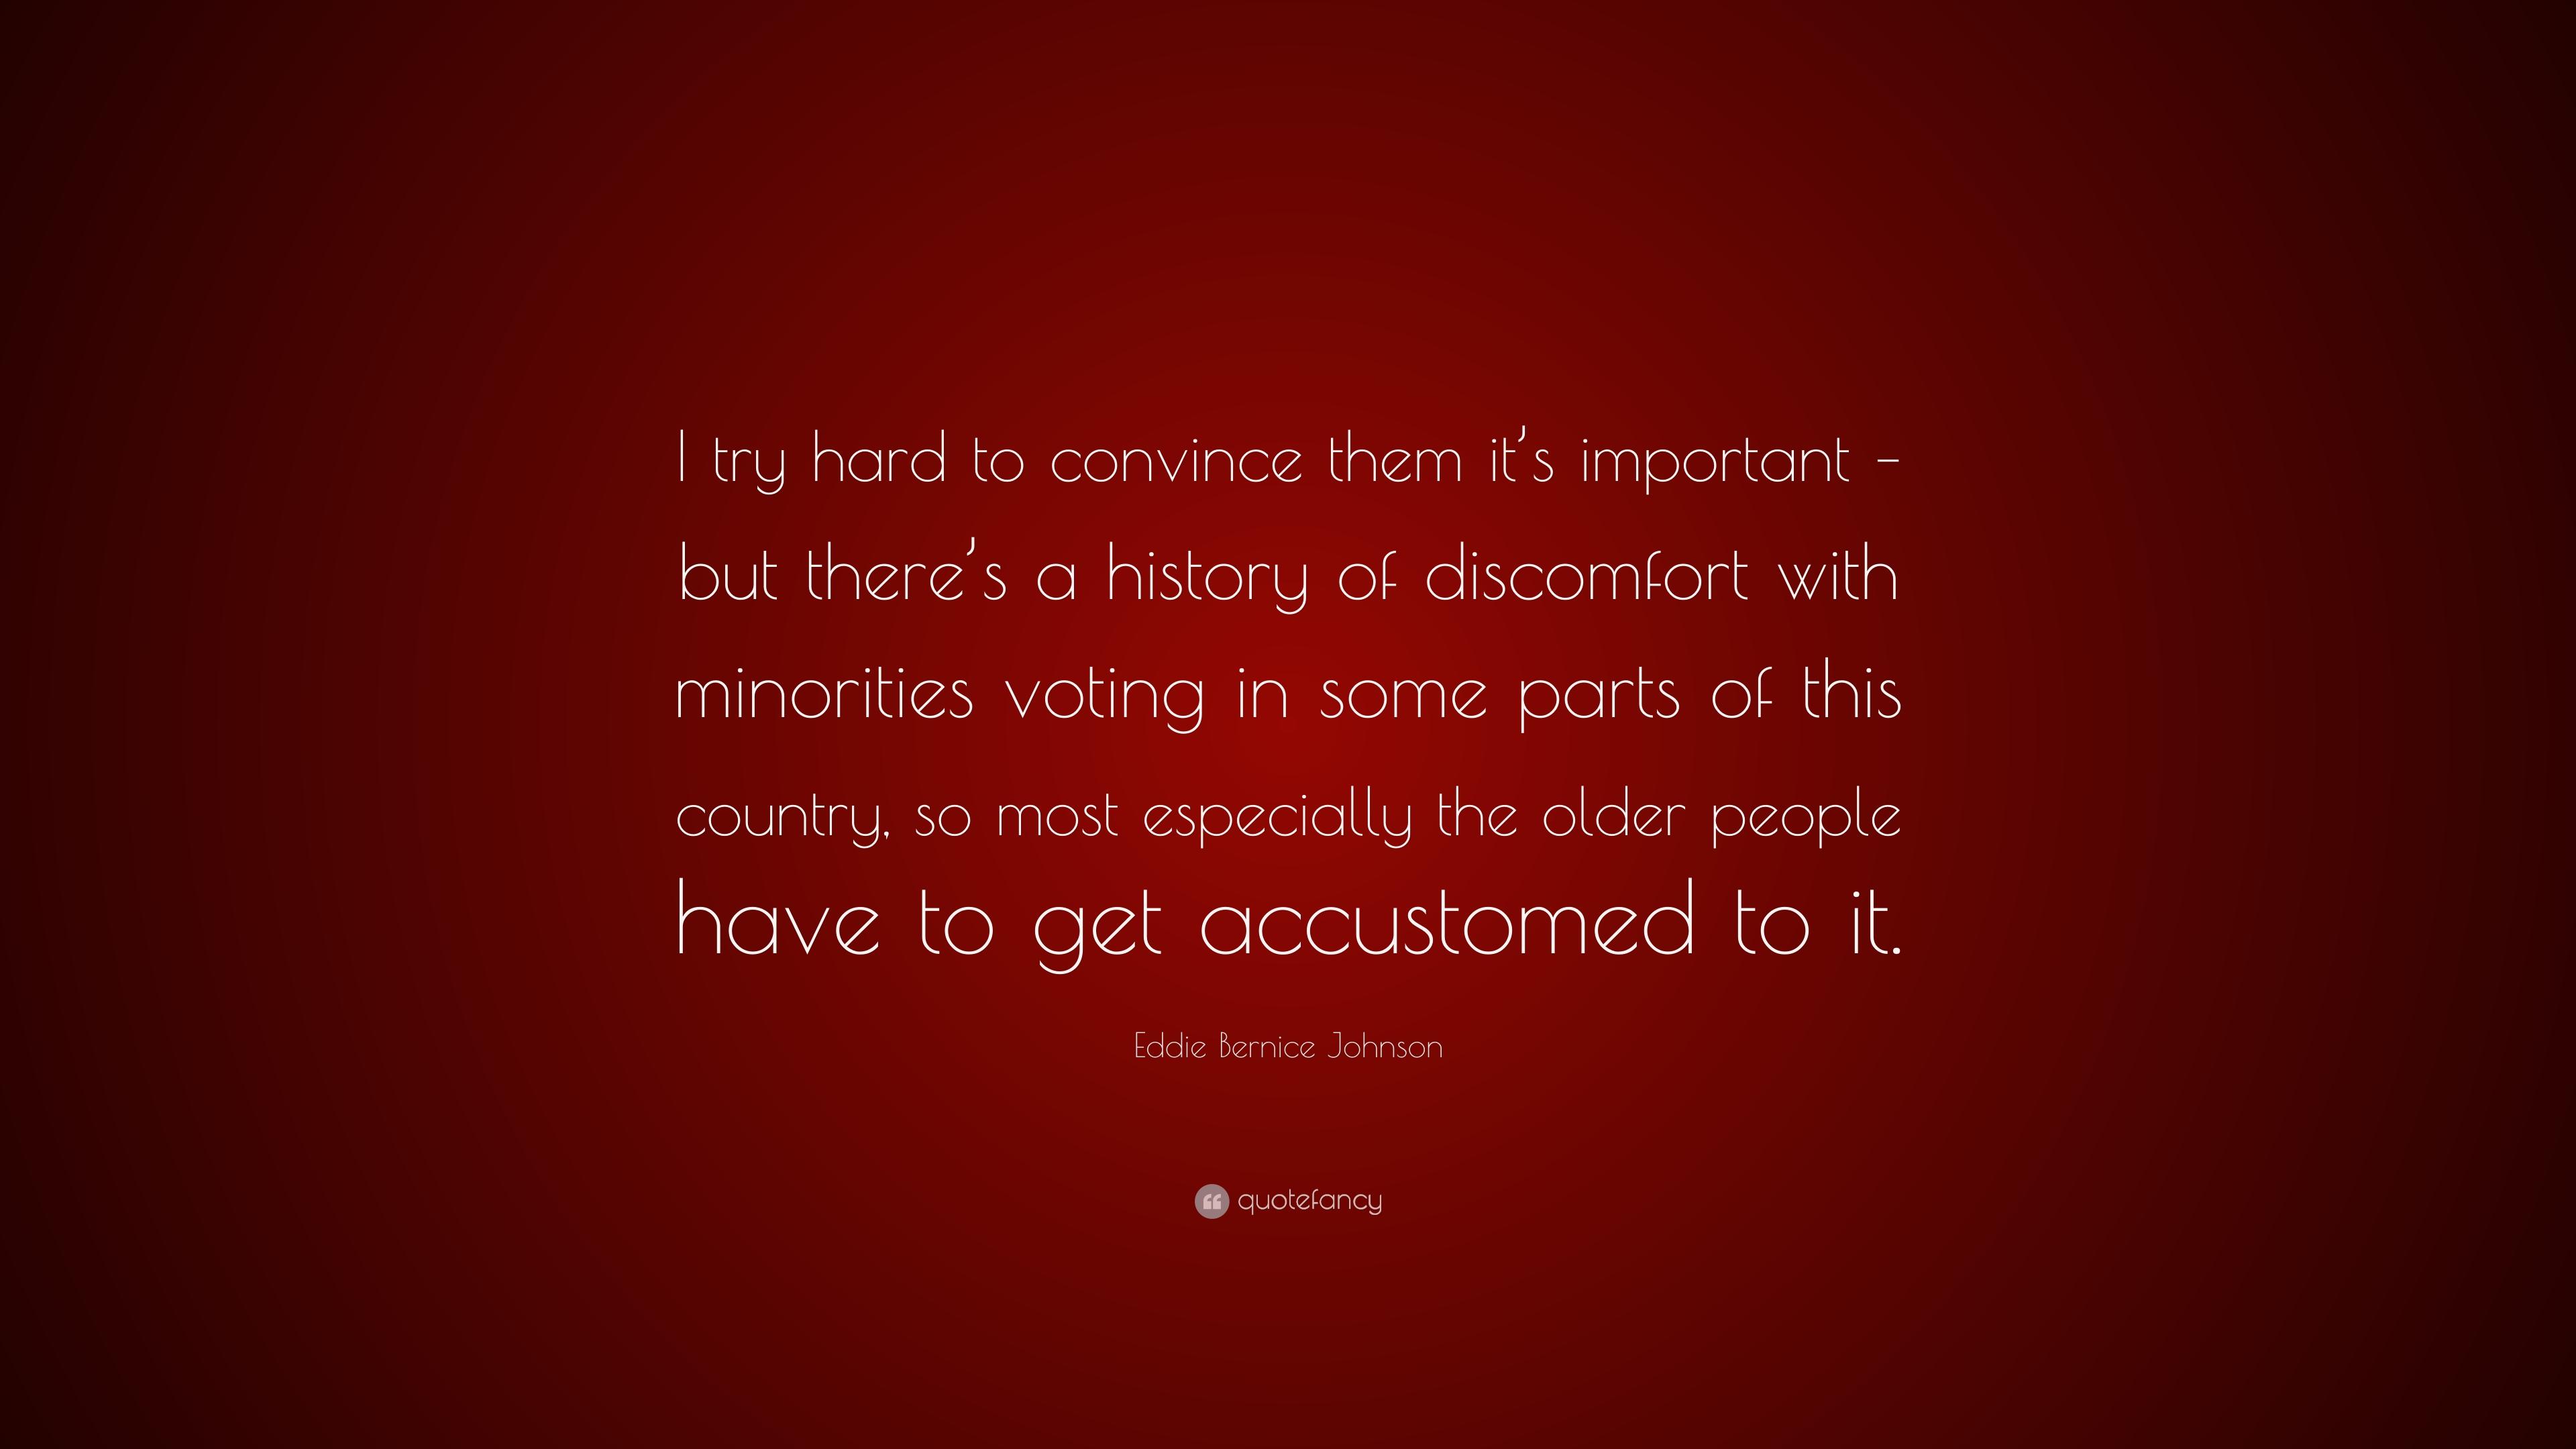 Eddie Bernice Johnson Quote: “I try hard to convince them it's